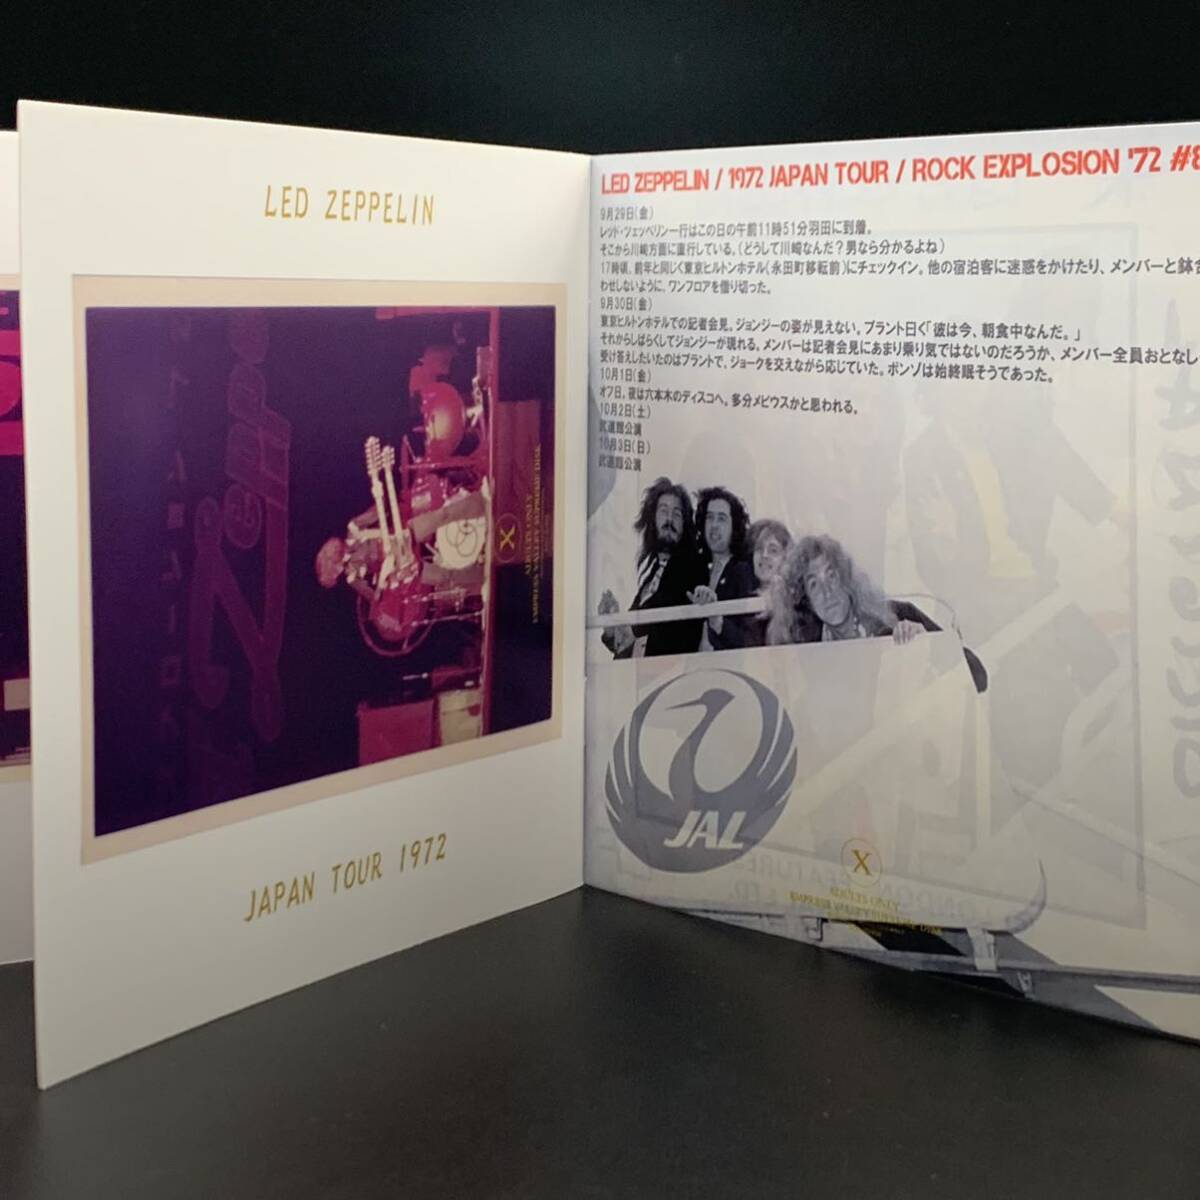 LED ZEPPELIN / JET STREAM - Pro Use Only 4CD Box with Booklet Set : Super Rare!! Hard to Find!! For enthusiastic collector only!!